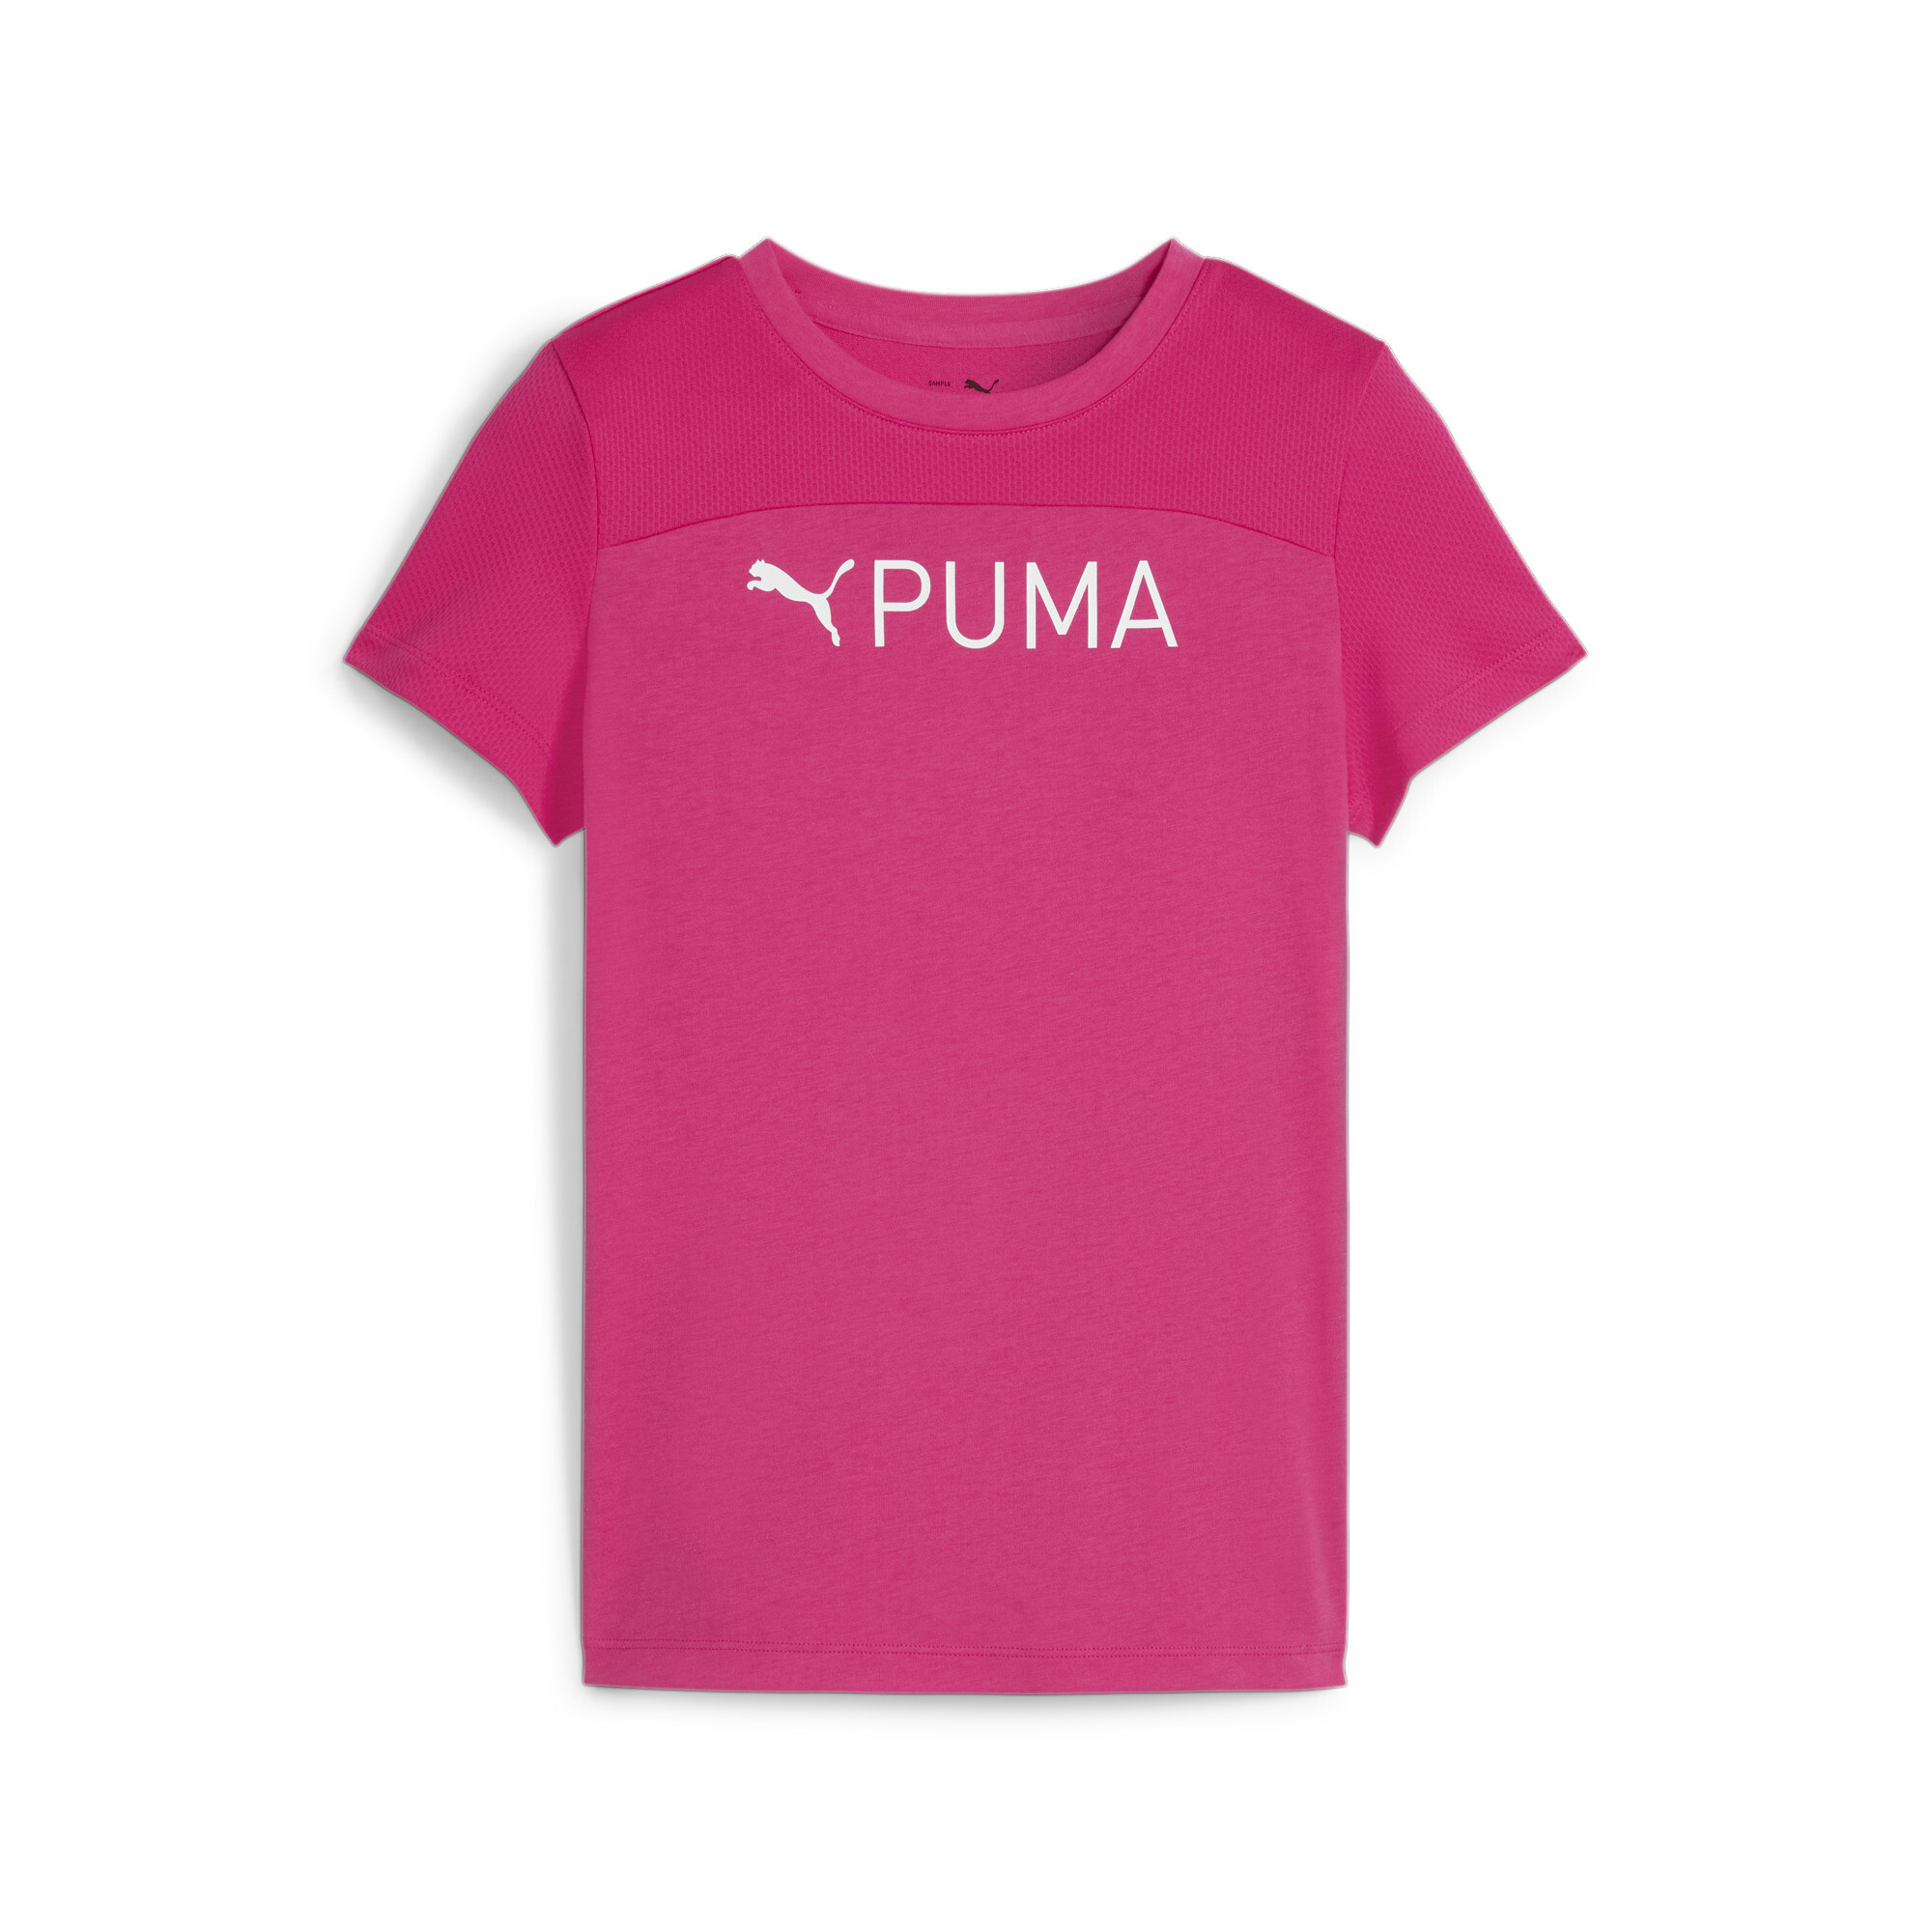 Women's Puma FIT Youth T-Shirt, Pink, Size 9-10Y, Shop